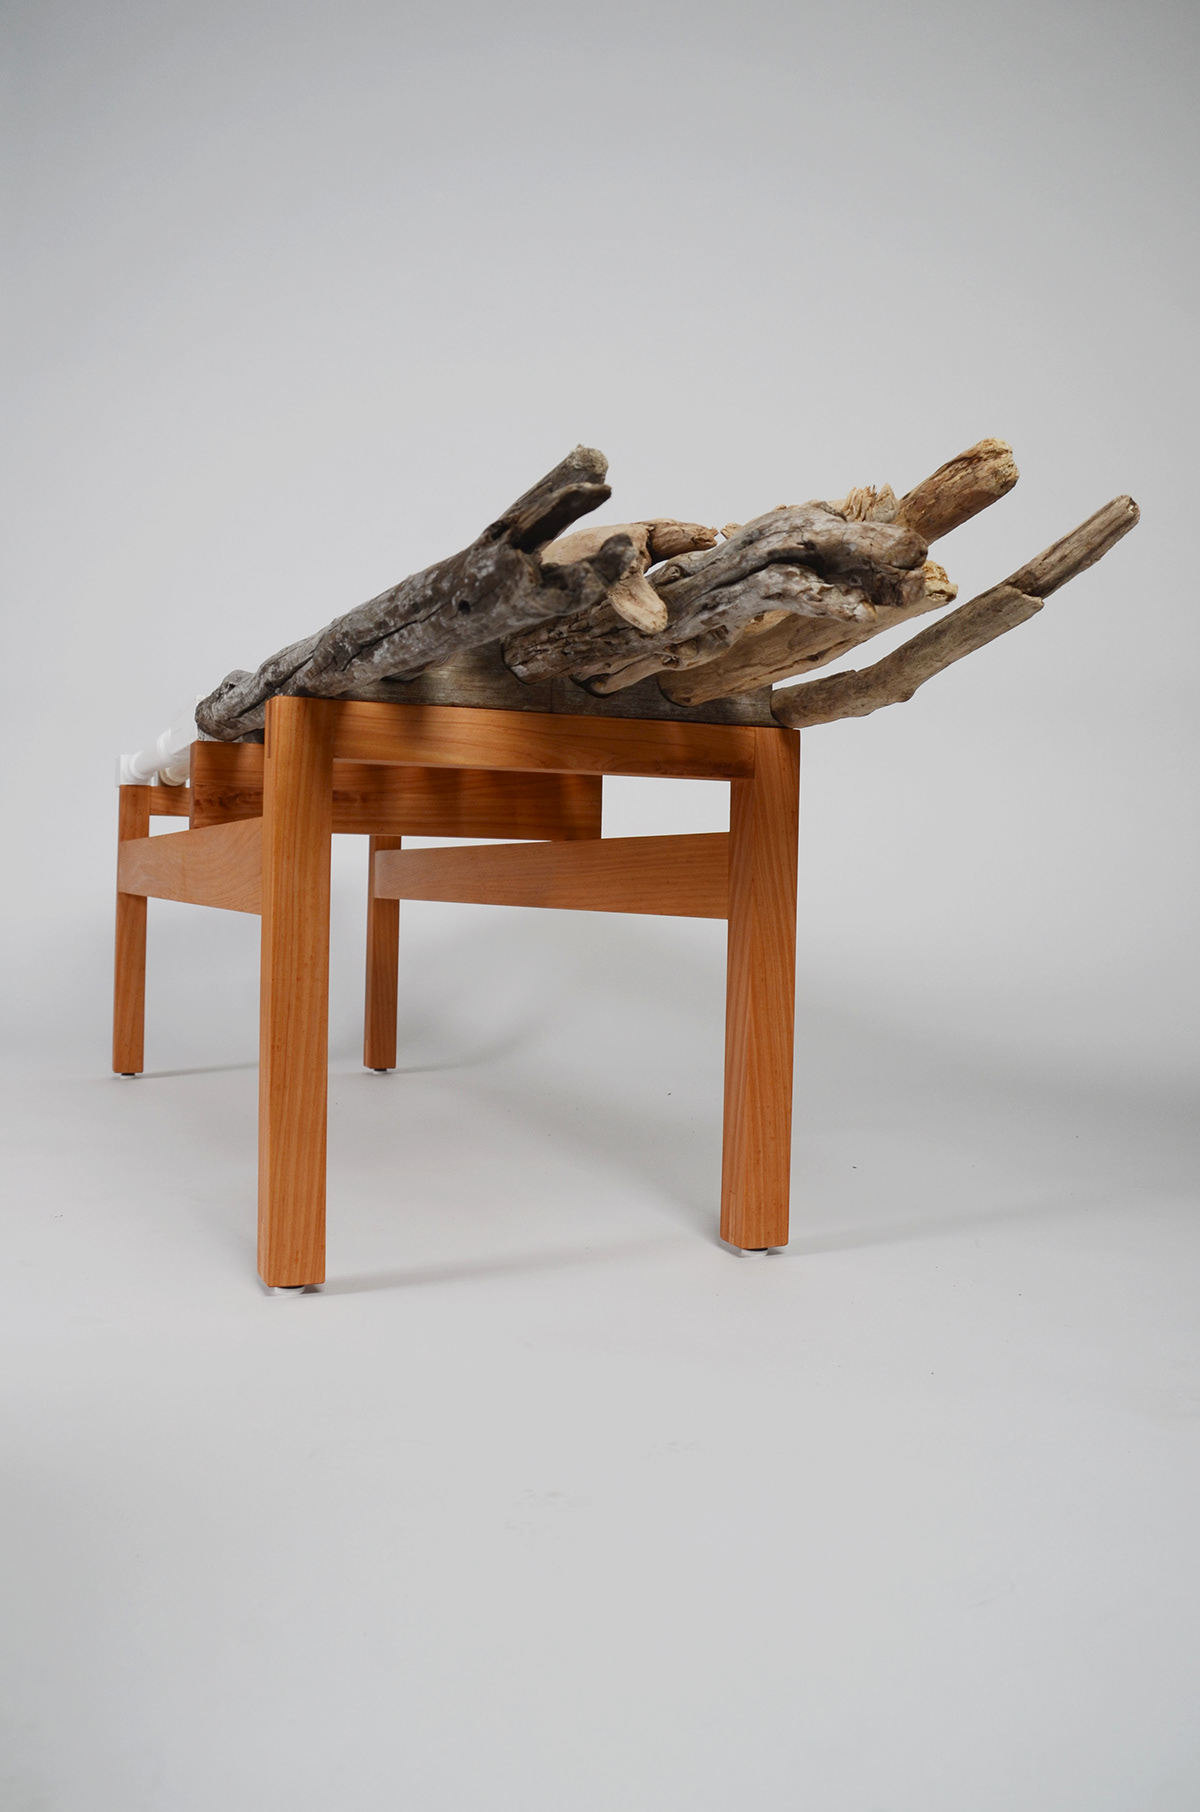 Sustainable Design tara cooney recycled materials benchseat furniture point of connection